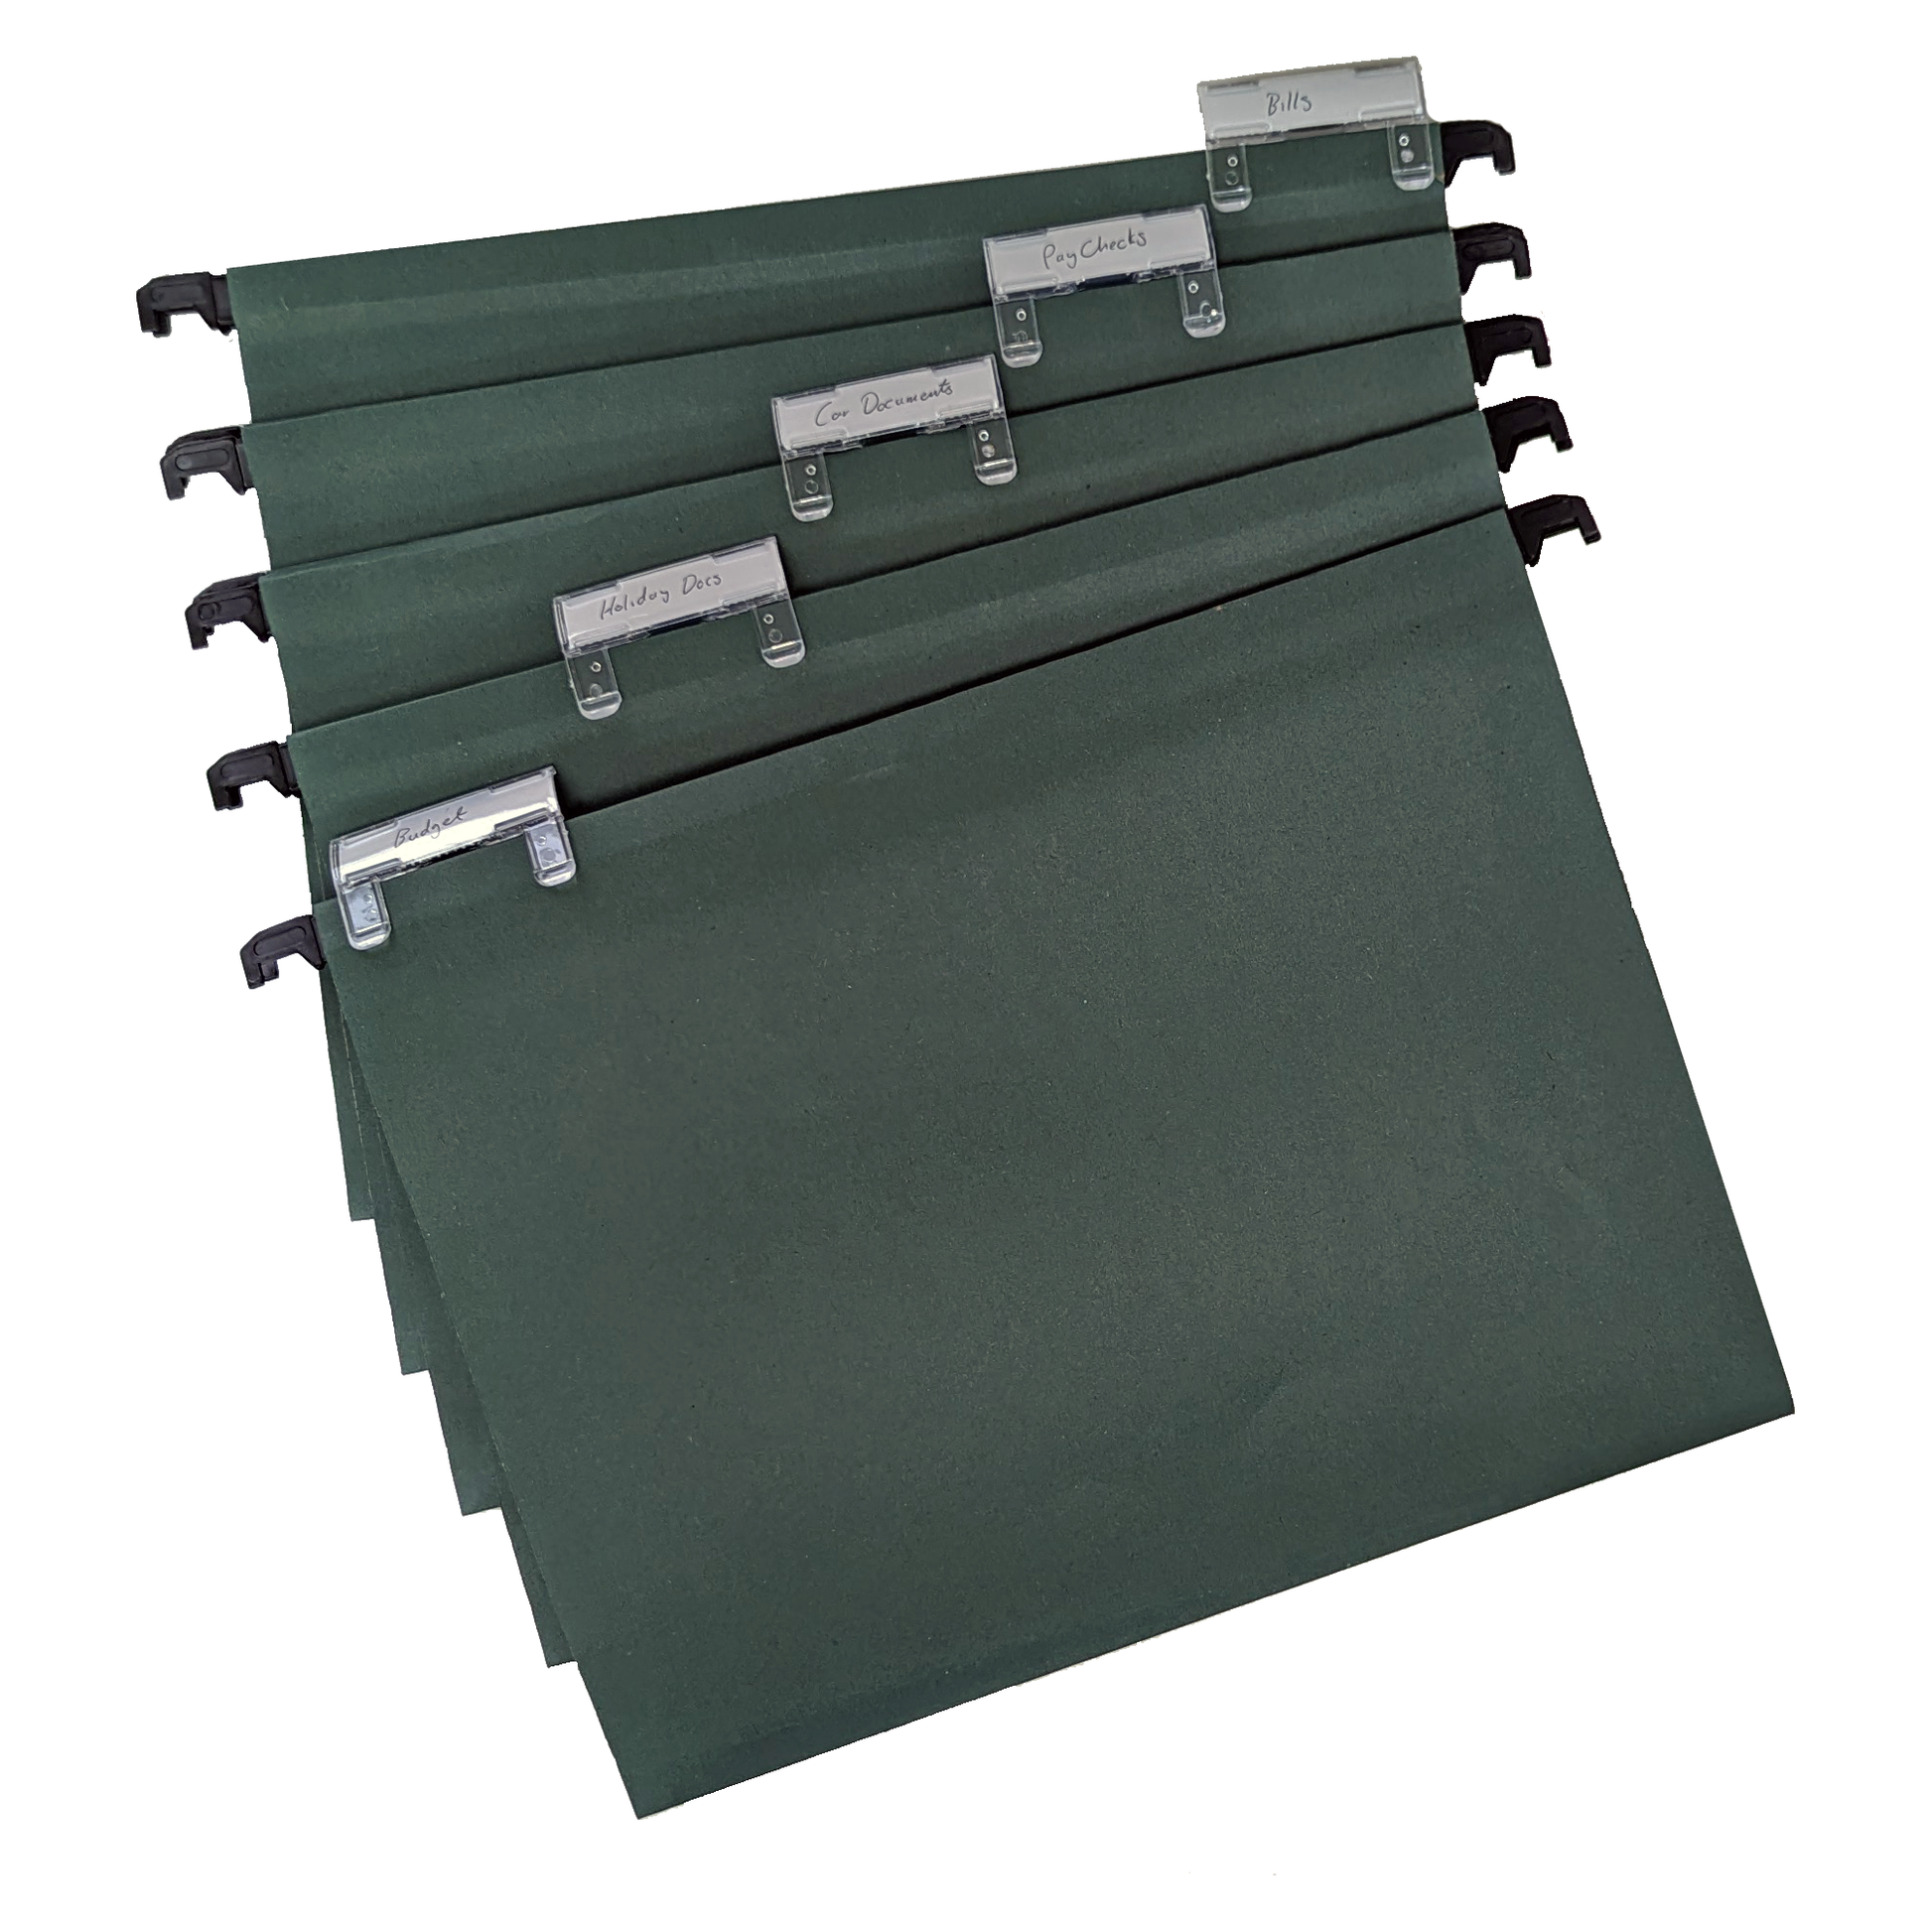 A set of A4 green manilla suspension files equipped with clip-on index tabs and white inserts for labeling, neatly stacked and organized for efficient document filing and retrieval.